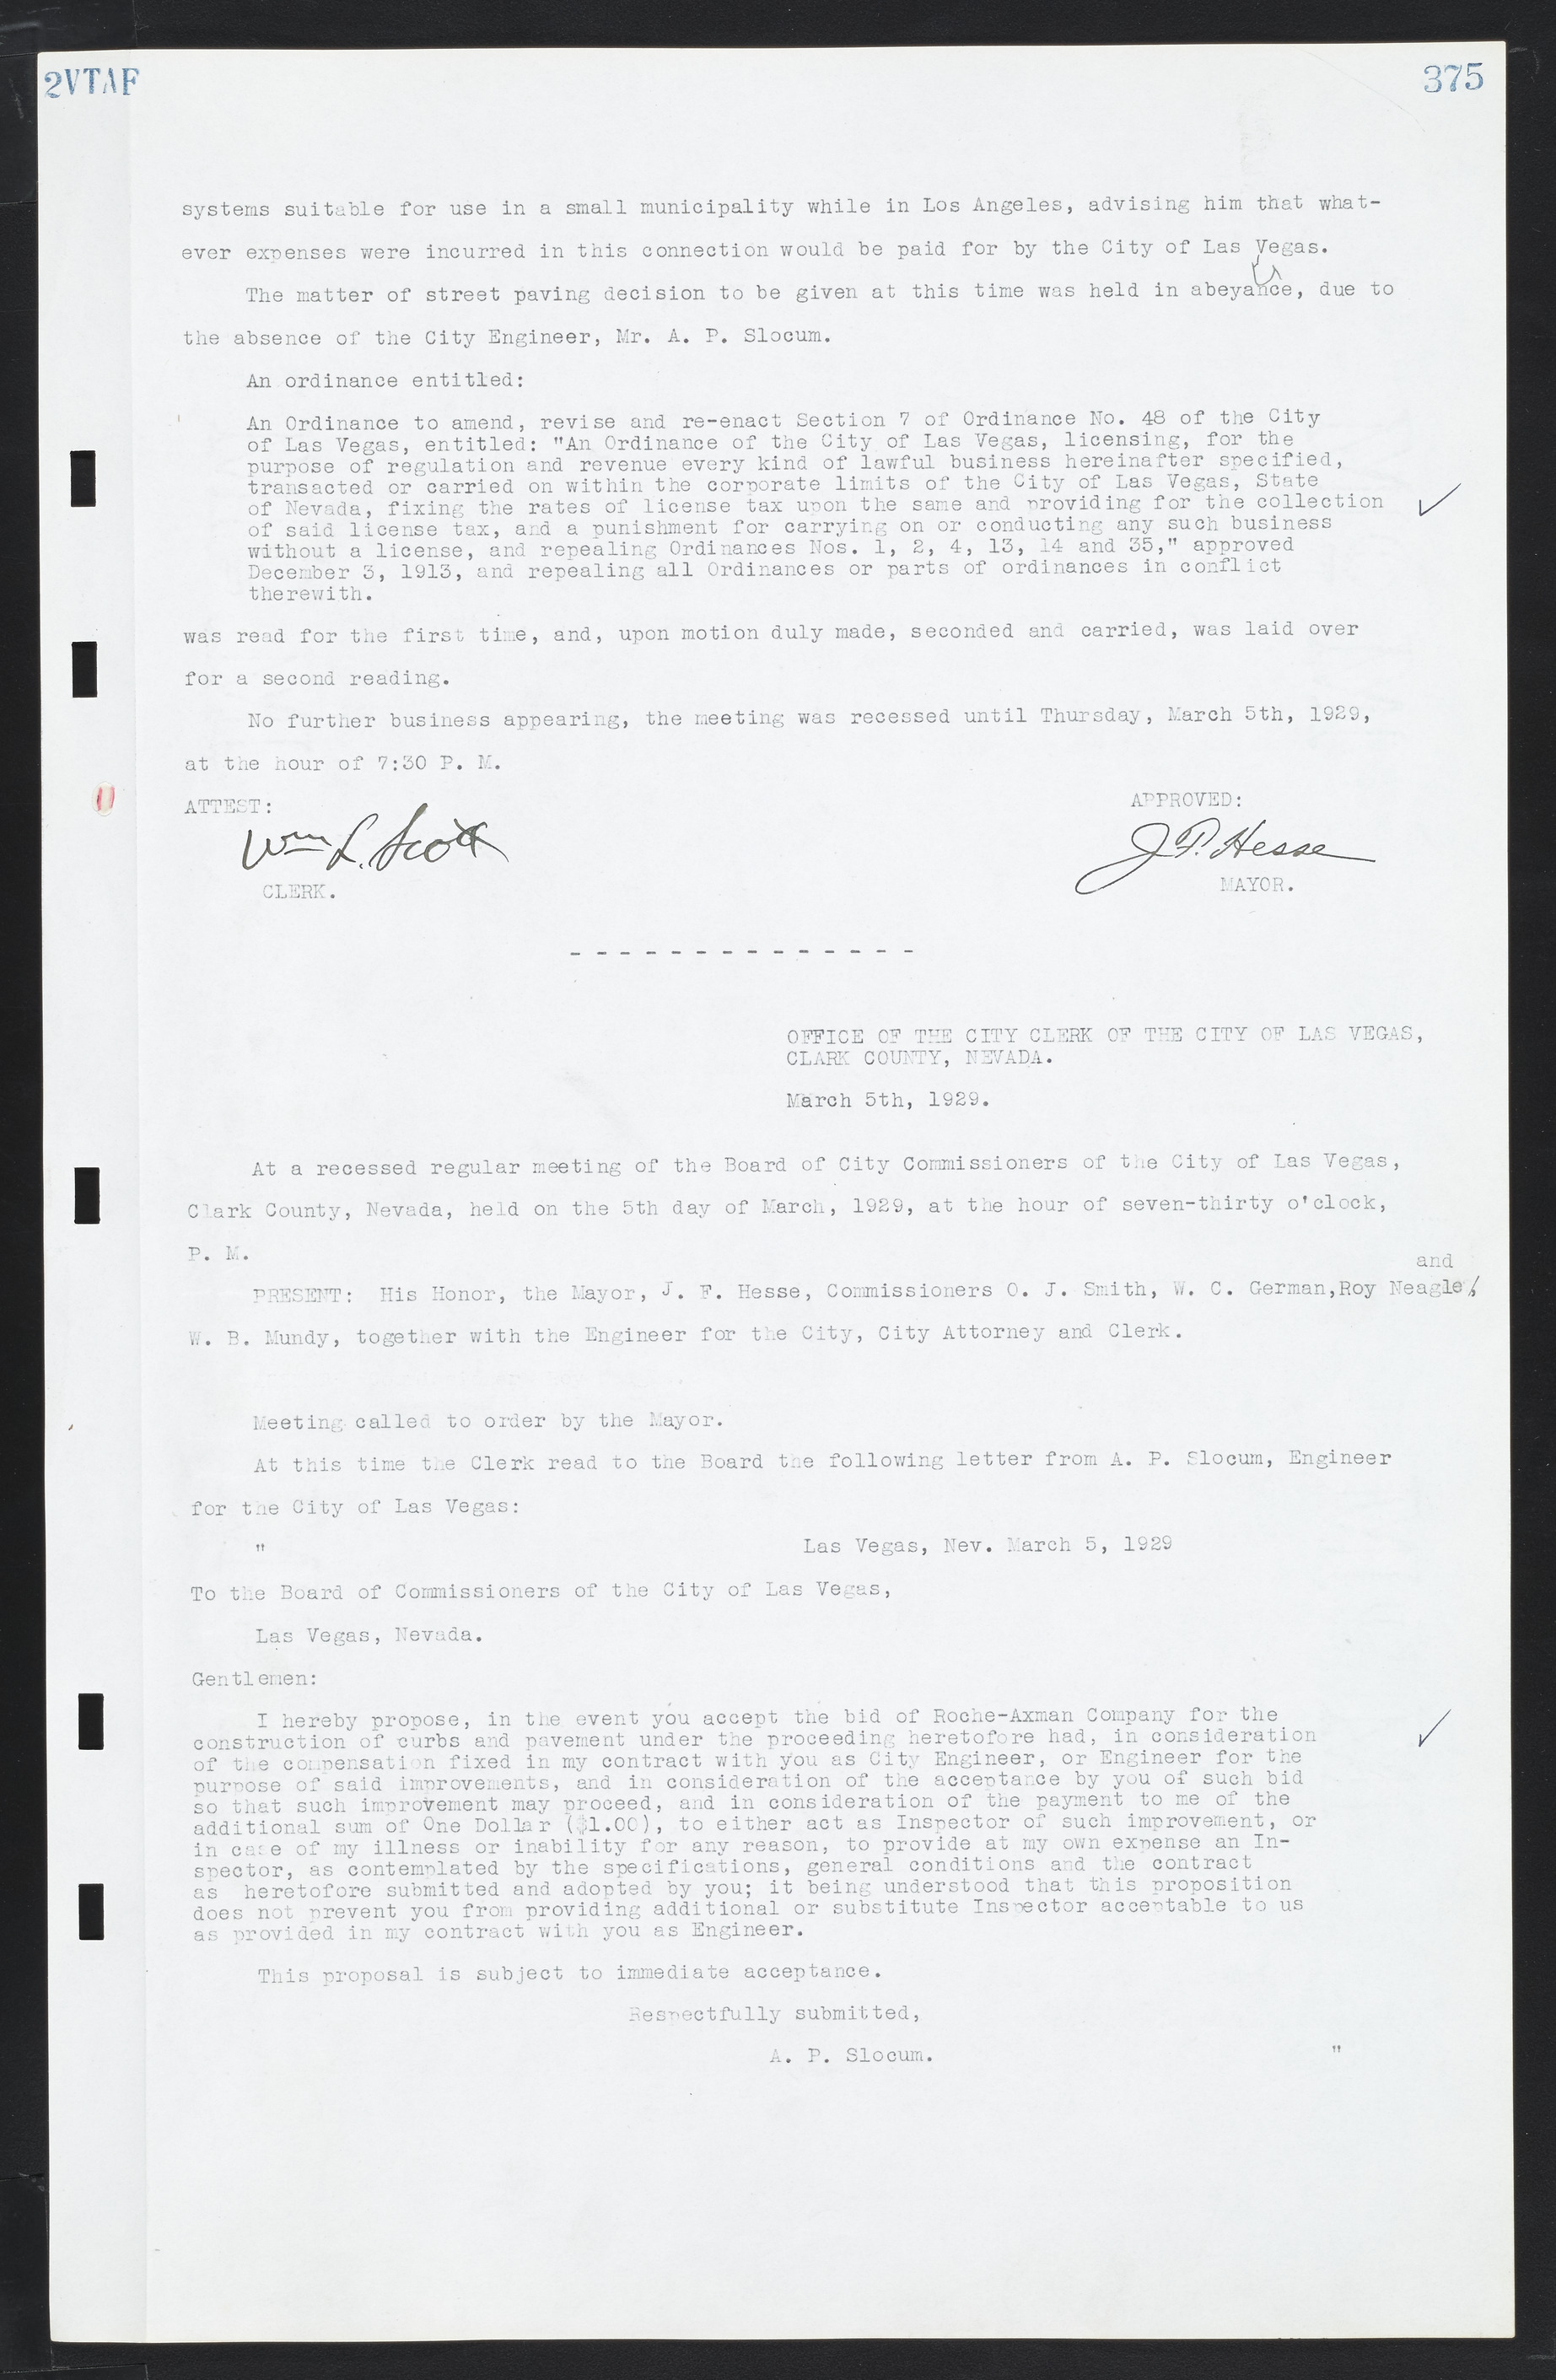 Las Vegas City Commission Minutes, March 1, 1922 to May 10, 1929, lvc000002-384